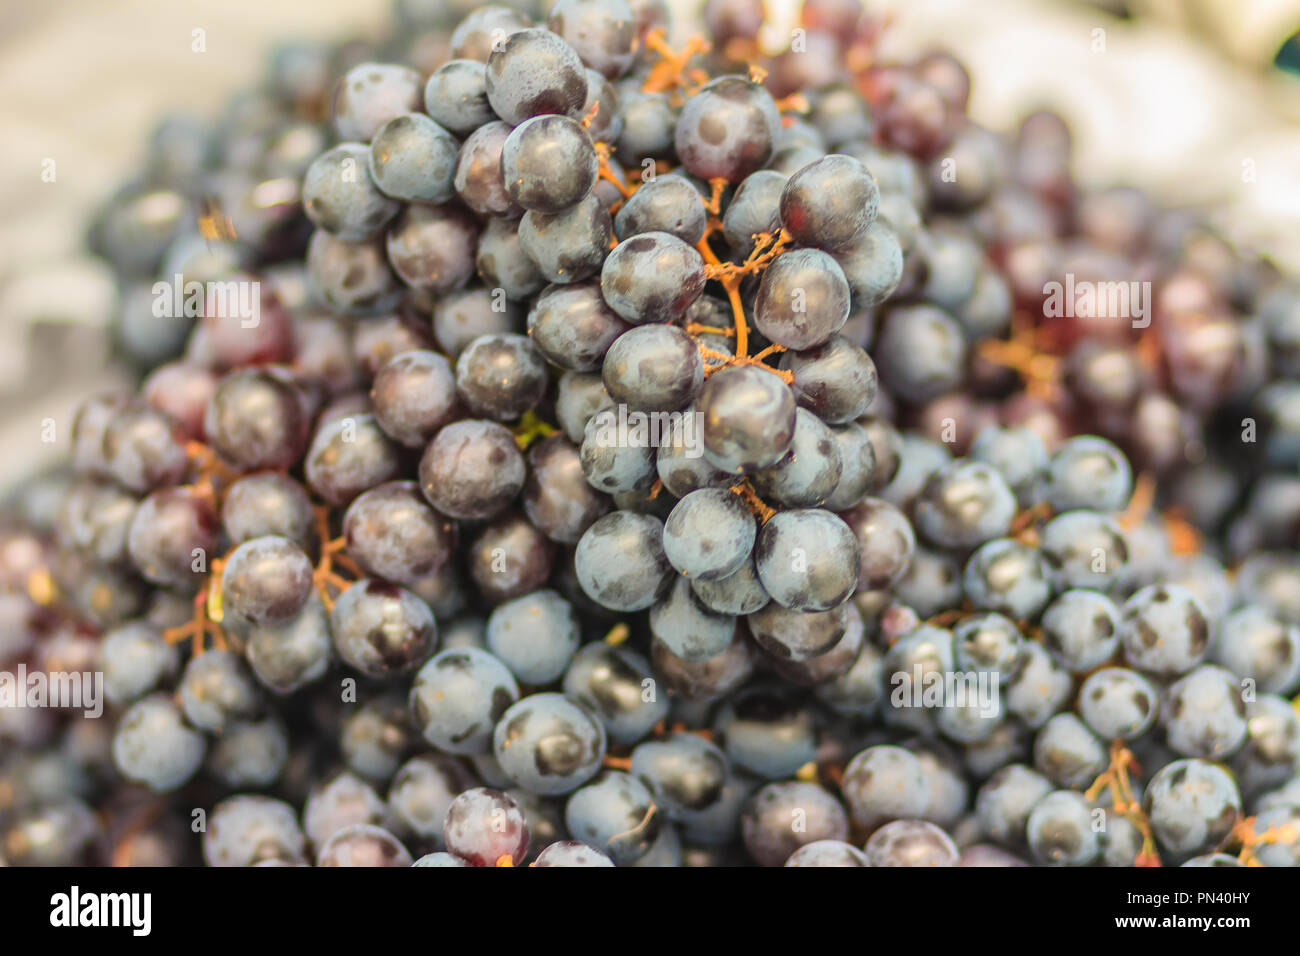 Black organic seedless grapes for sale at the fruit market. Bunch of ...